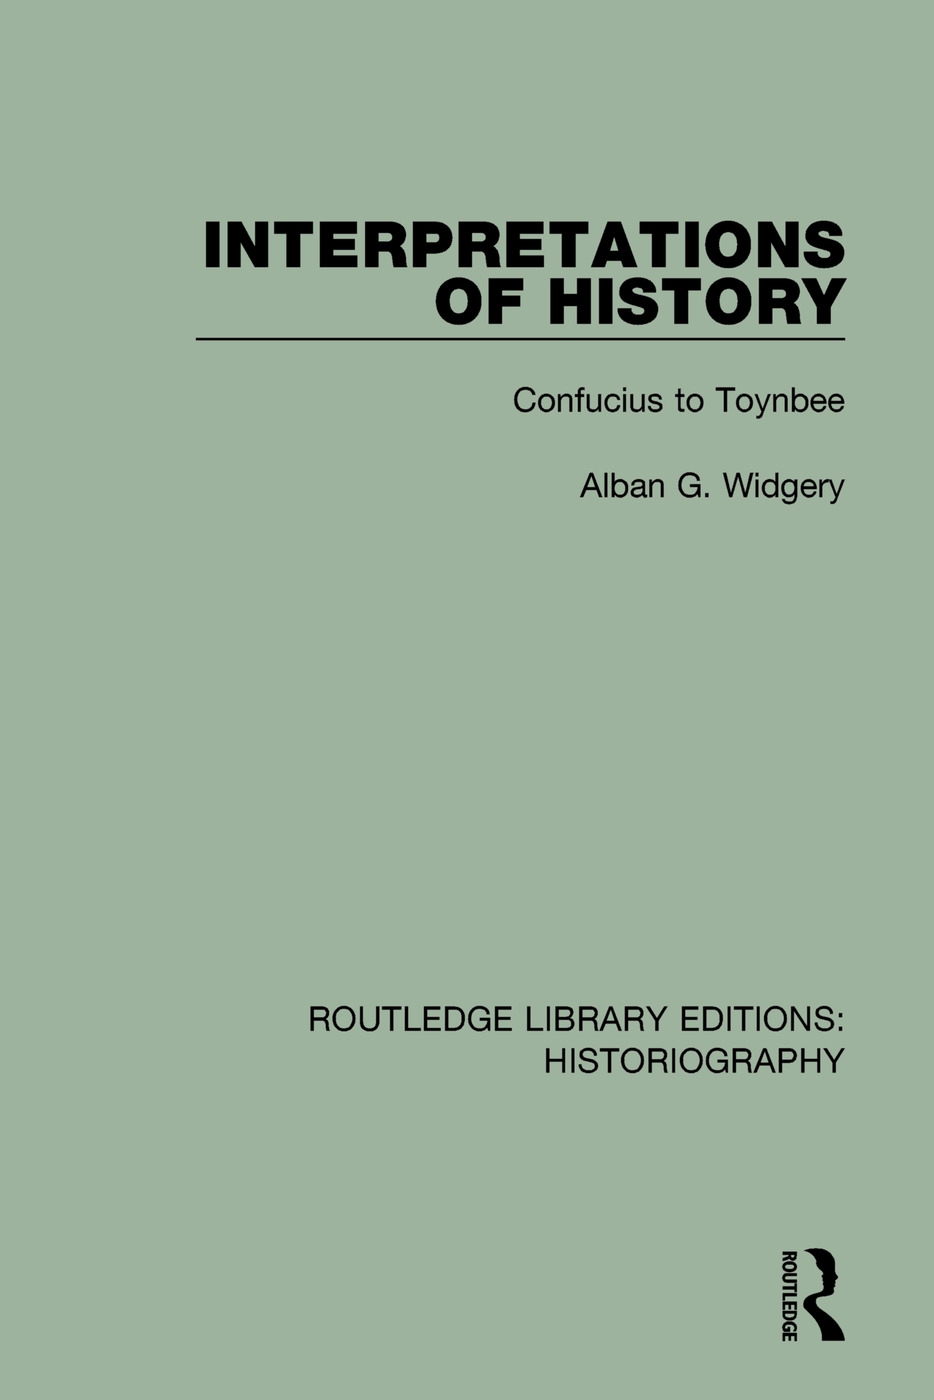 Interpretations of History: From Confucius to Toynbee